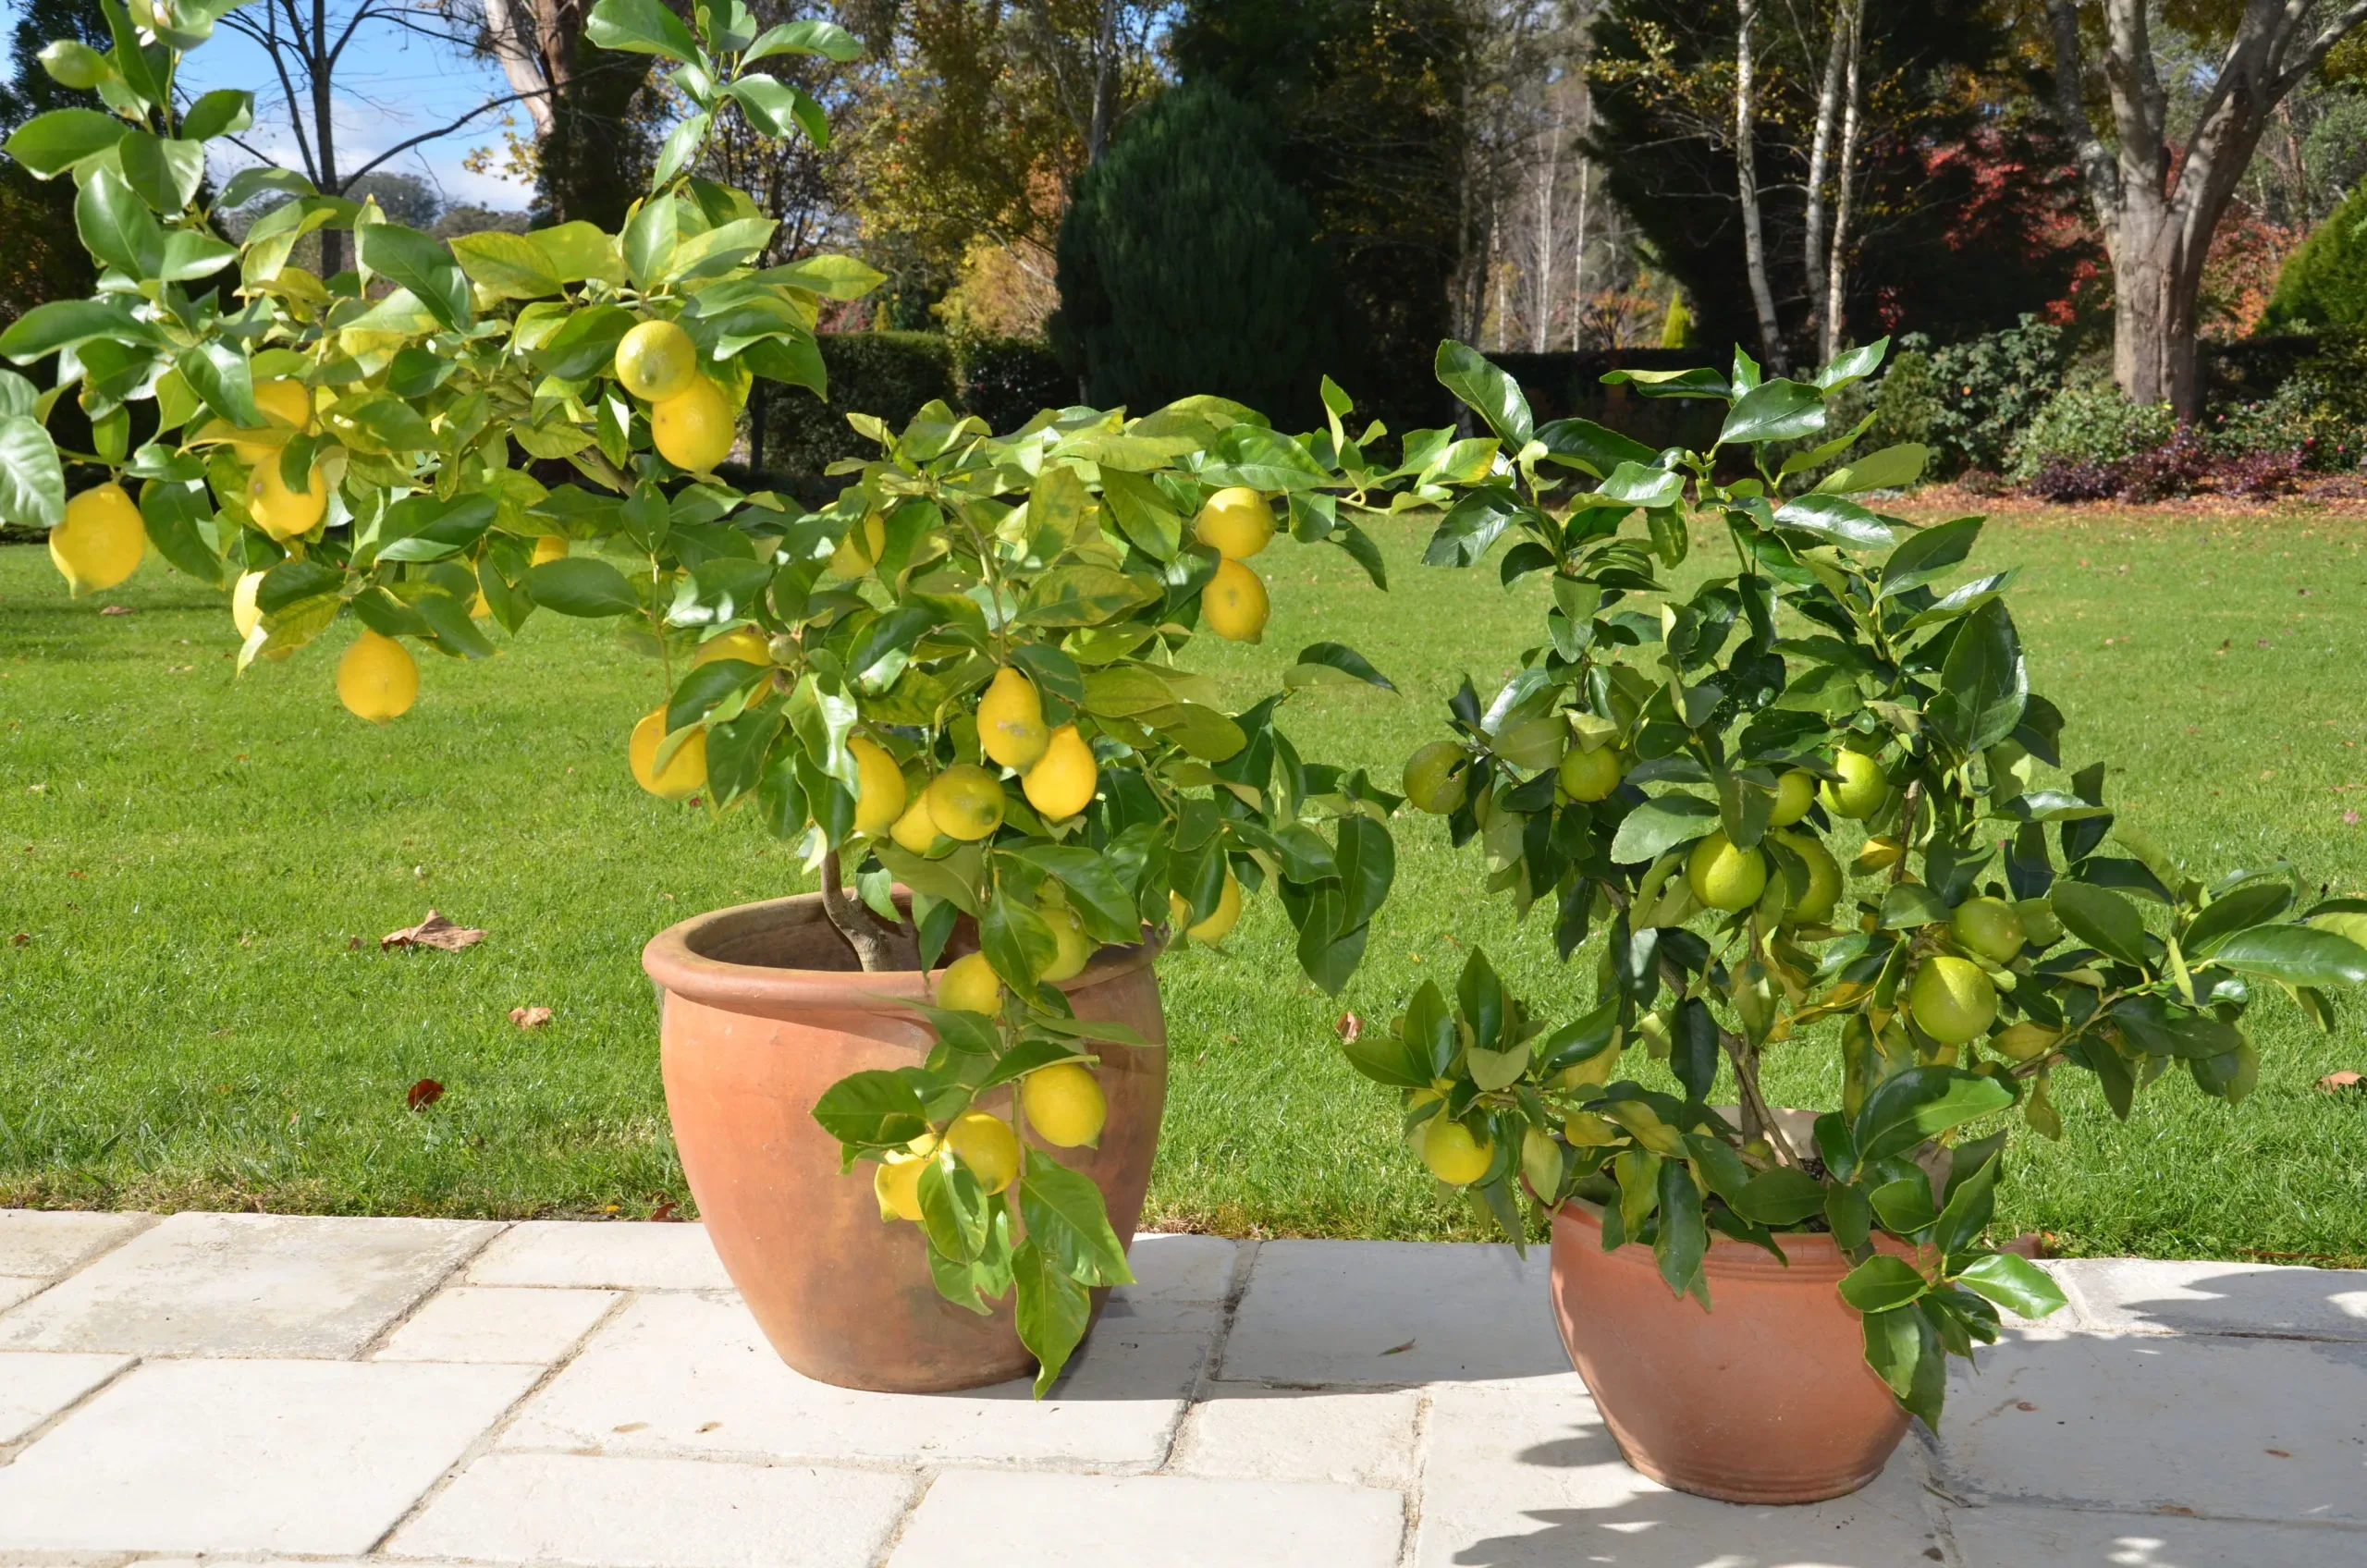 Growing Citrus Trees in Pots | The Tree Center™